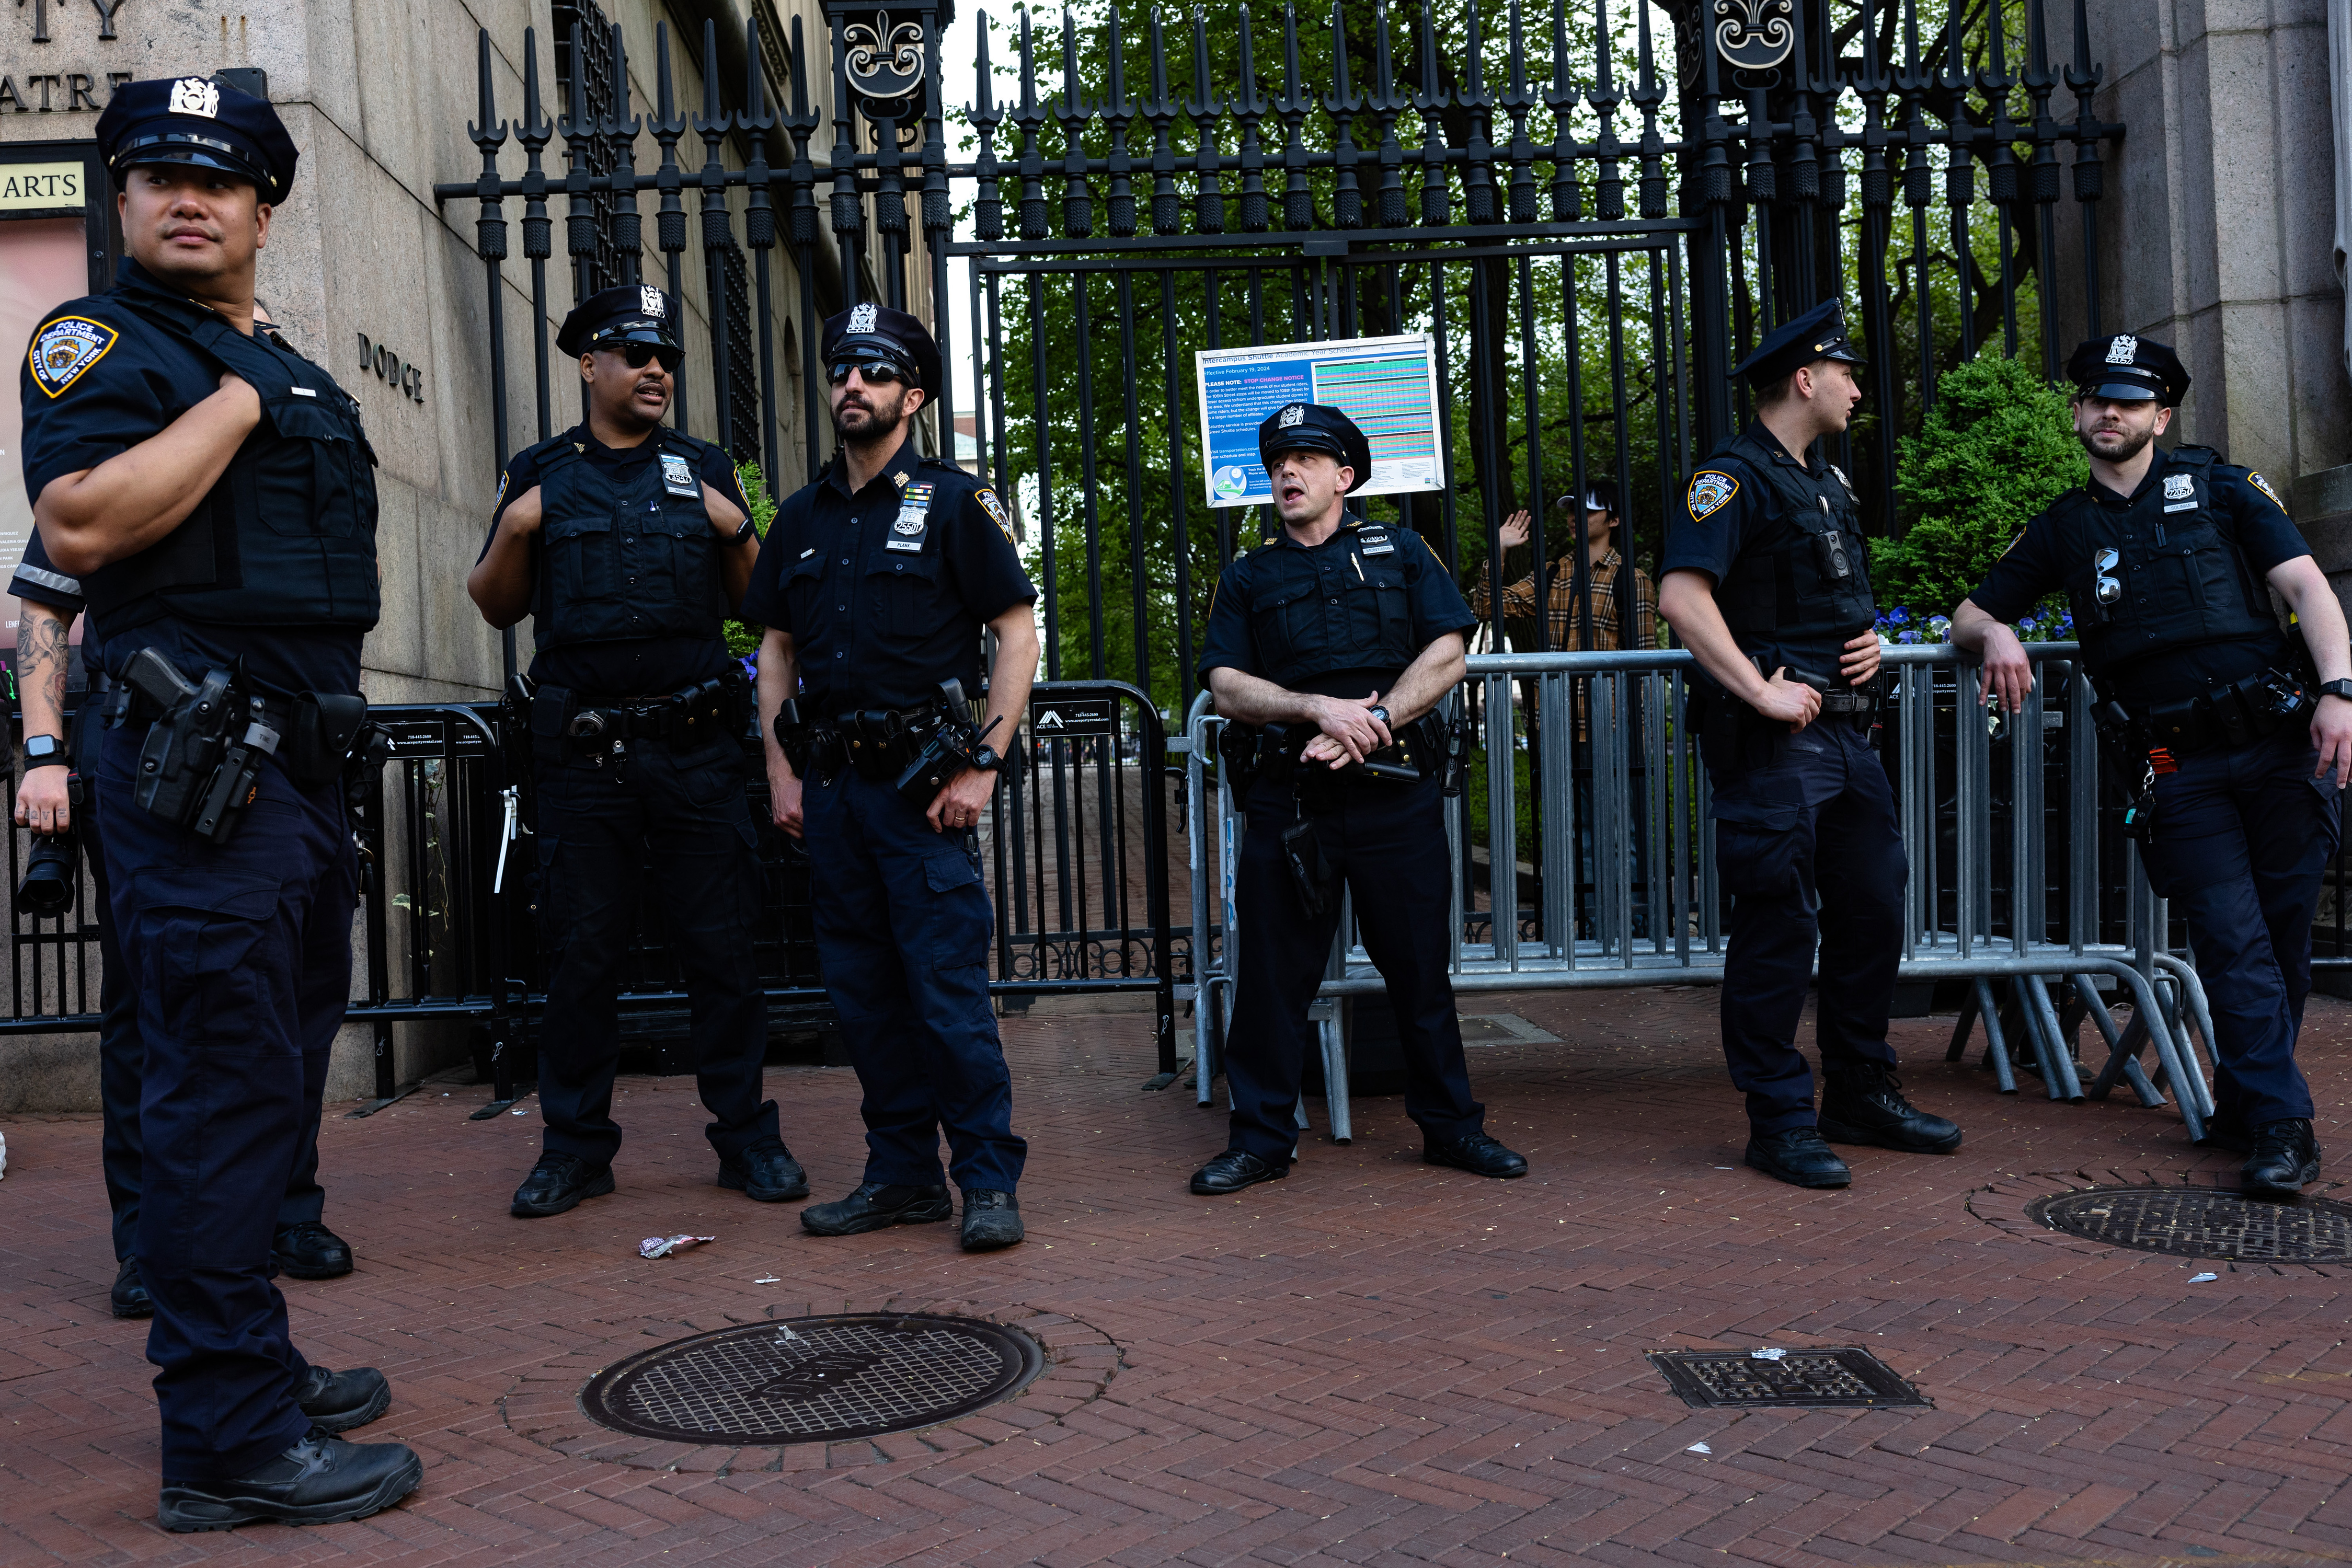 NEWSLINE: When the NYPD could get involved in Columbia protests